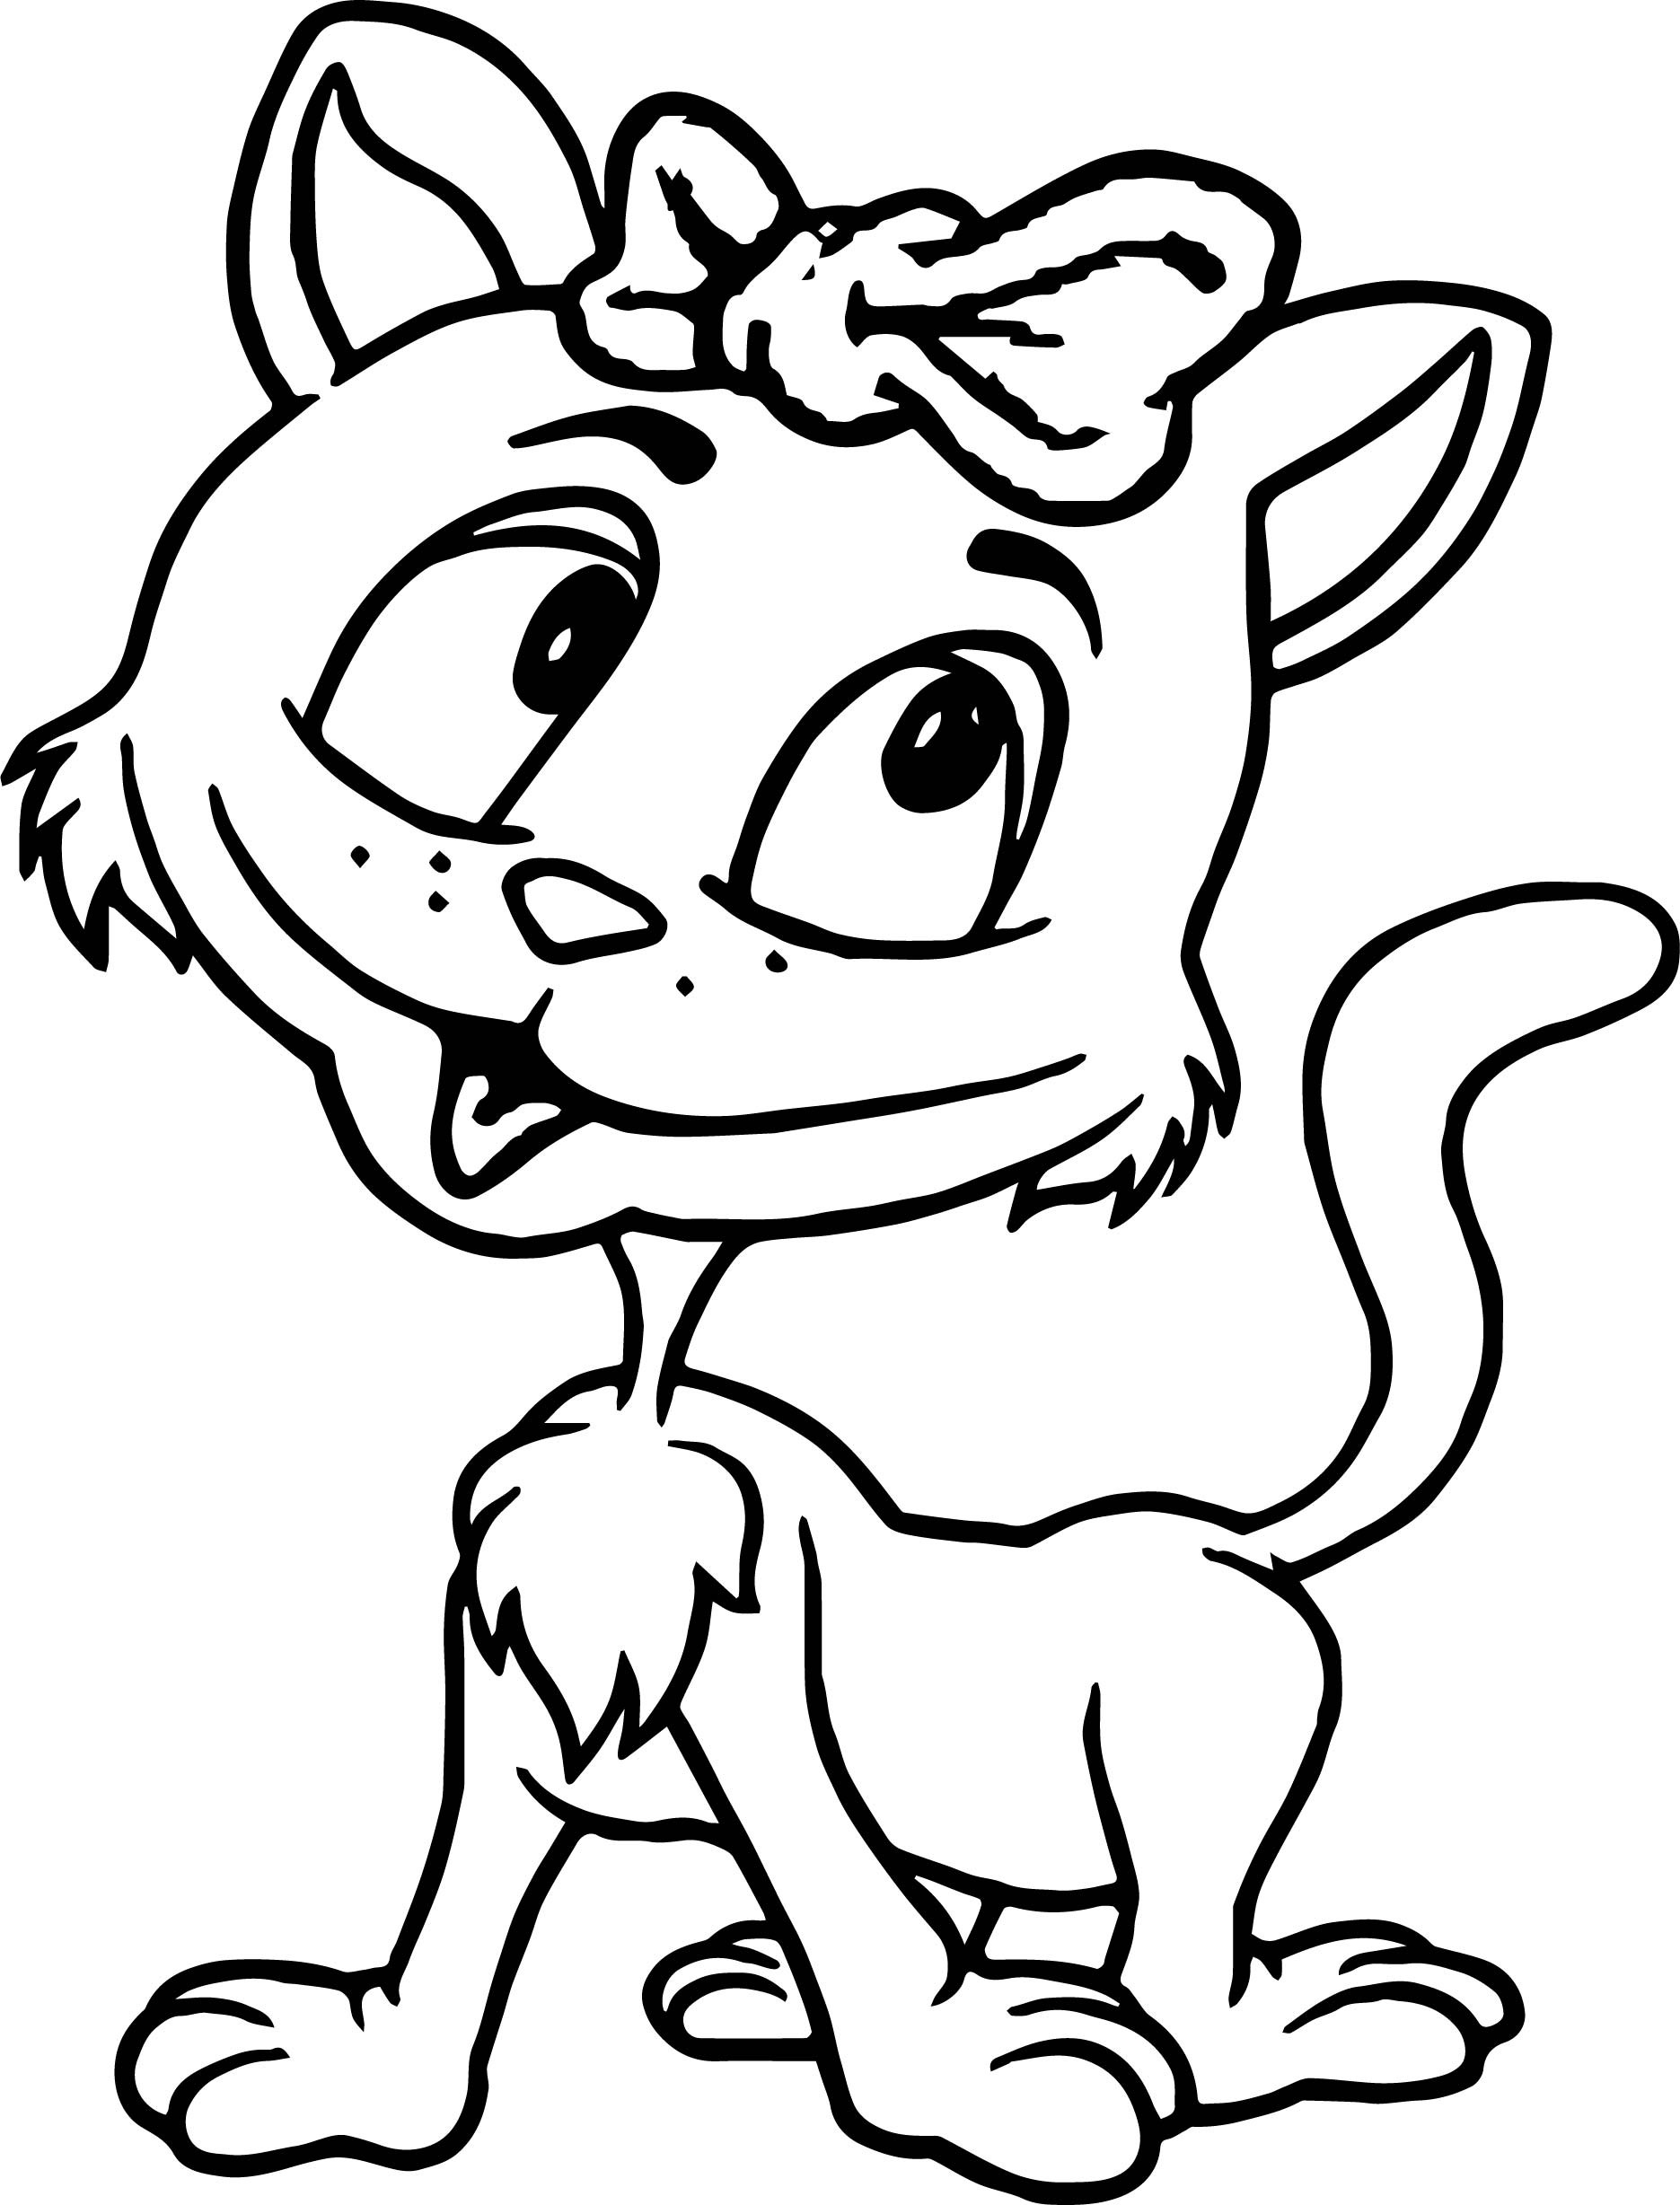 Kawaii Cat Girl Coloring Pages
 Cute Girl Cat Coloring Pages